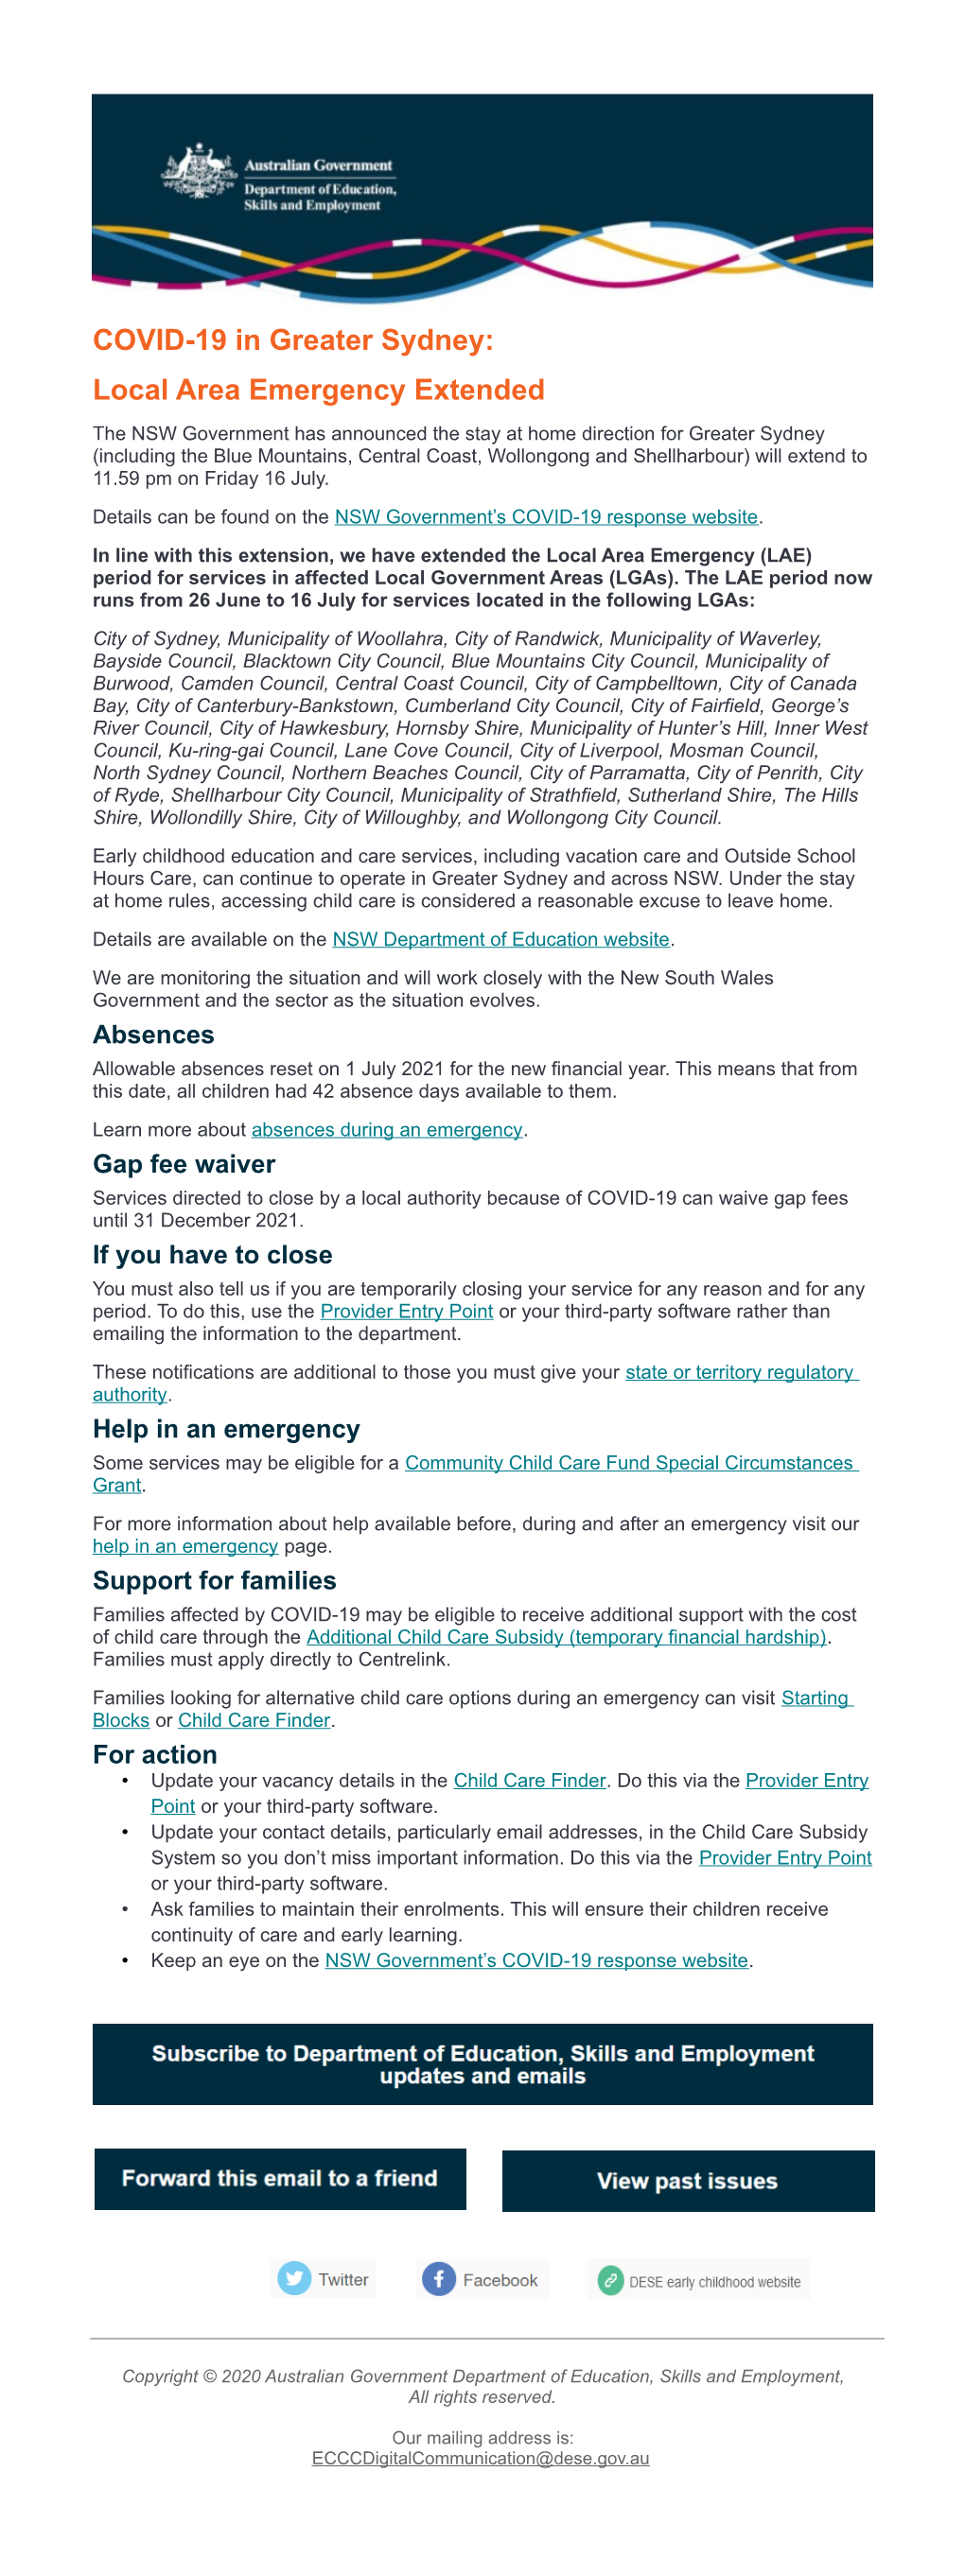 COVID-19 in Greater Sydney- Local Area Emergency Extended.Pdf